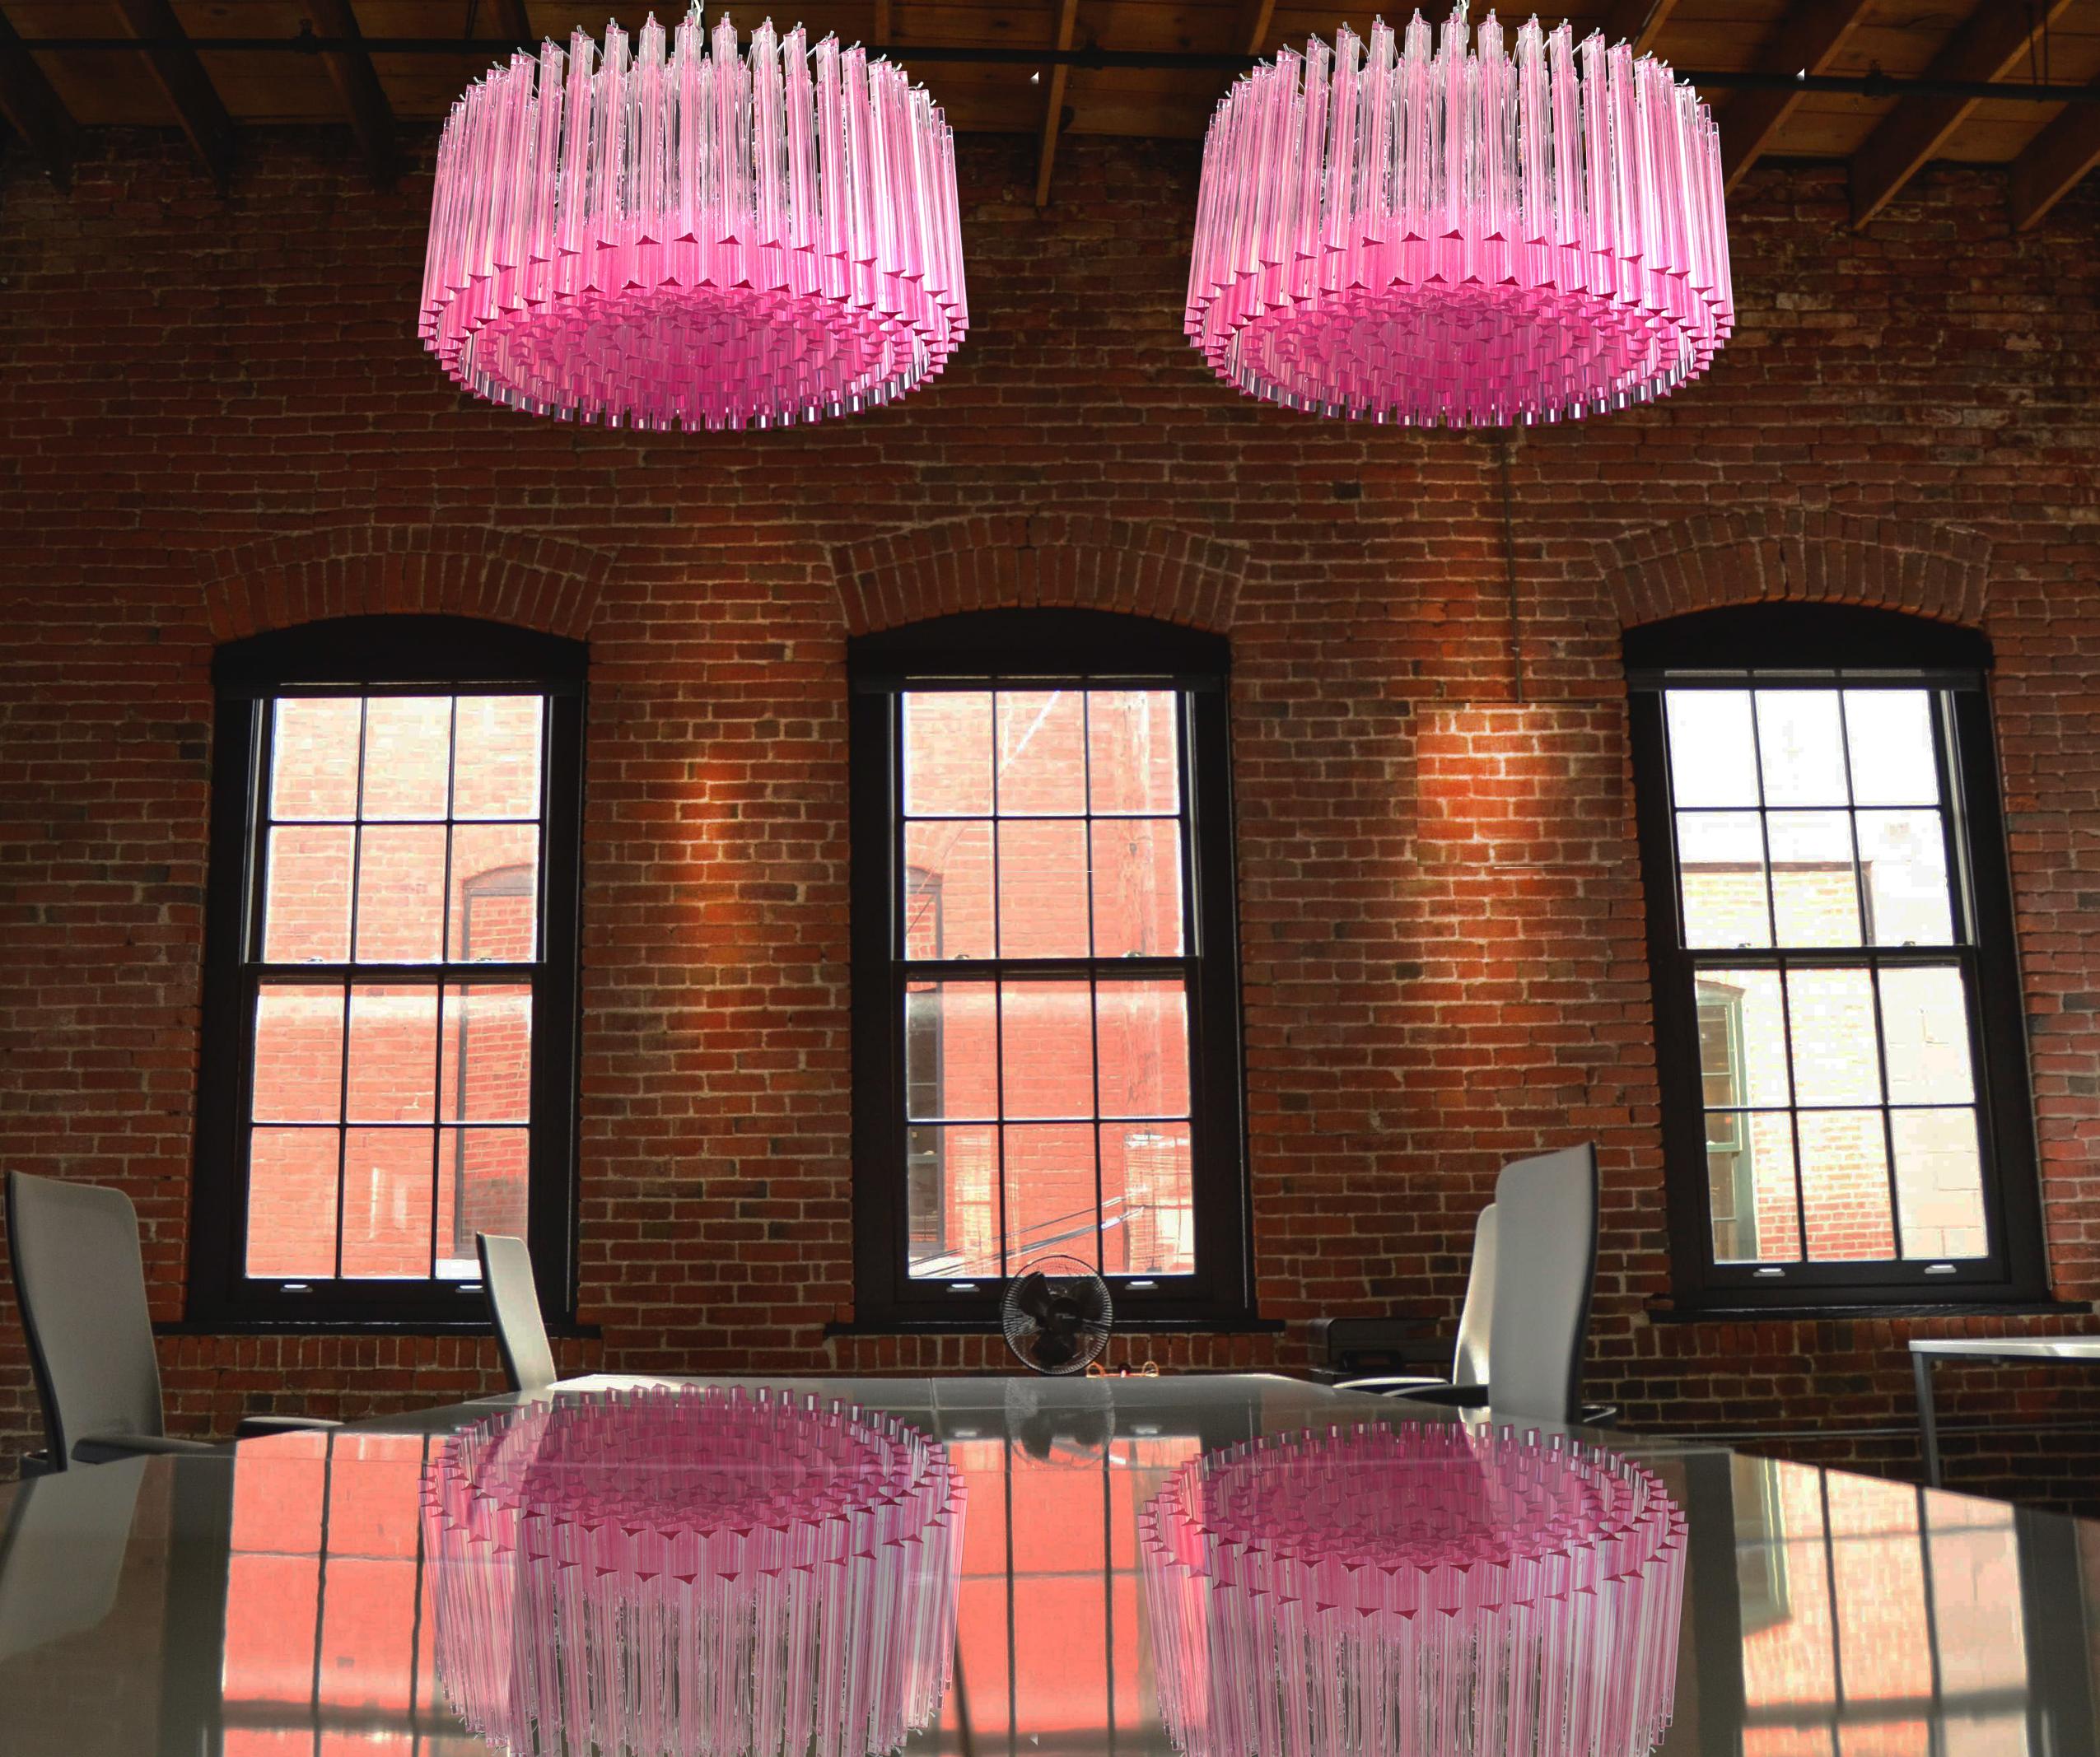 Pair magnificent Murano glass chandeliers, 265 pink triedri on crome frame. This large midcentury Italian chandelier is truly a timeless Classic.
Period: late 20th century
Dimensions: 43.30 inches (110 cm) height with chain; 15.75 inches (40 cm)